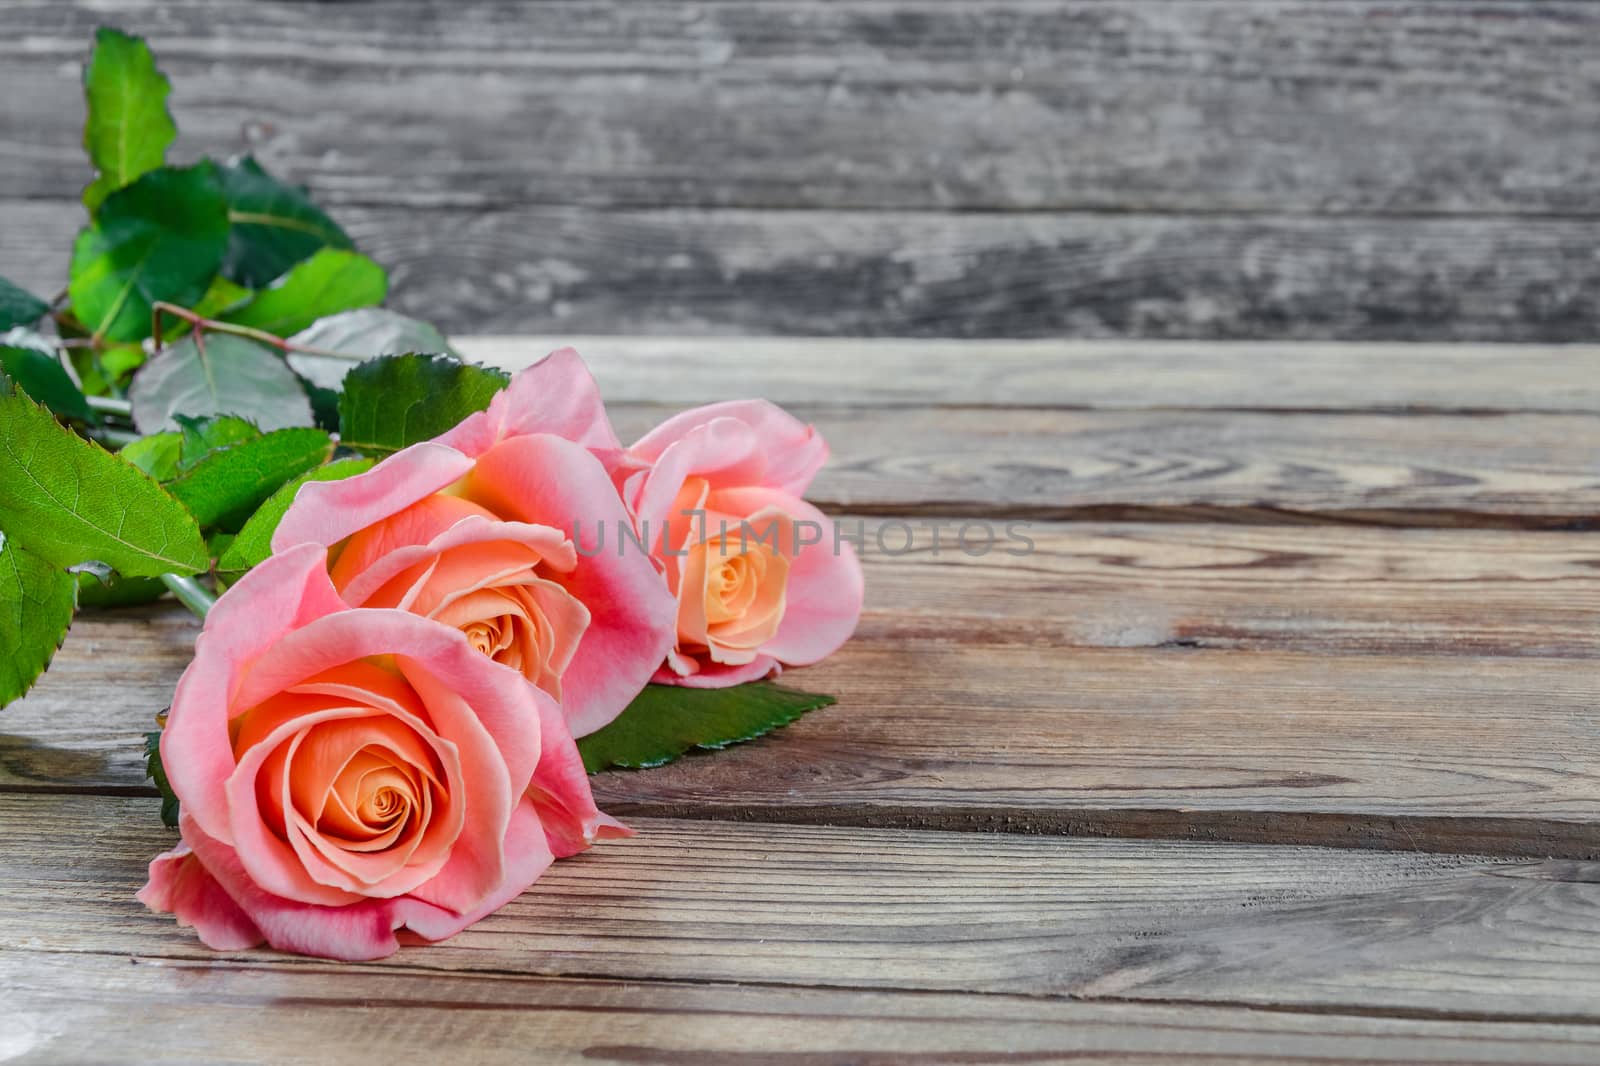 Roses flower on wooden rustic background